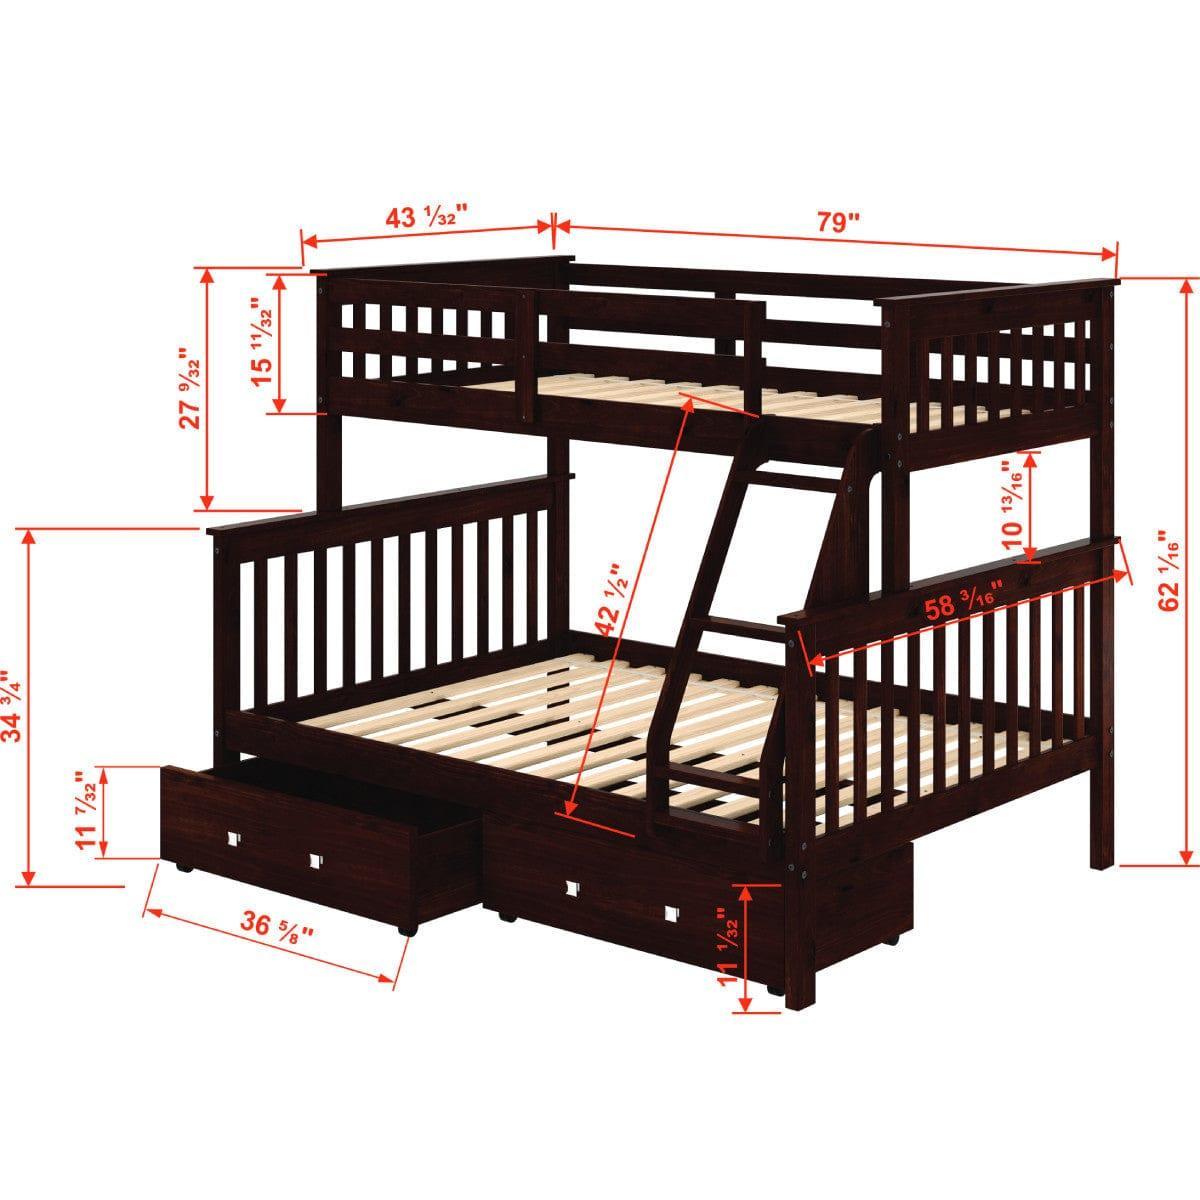 Donco Twin/Full Mission Bunk Bed W/Dual Under Bed Drawers In Dark Cappuccino Finish 122-3-TFCP_505-CP - Bedroom Depot USA